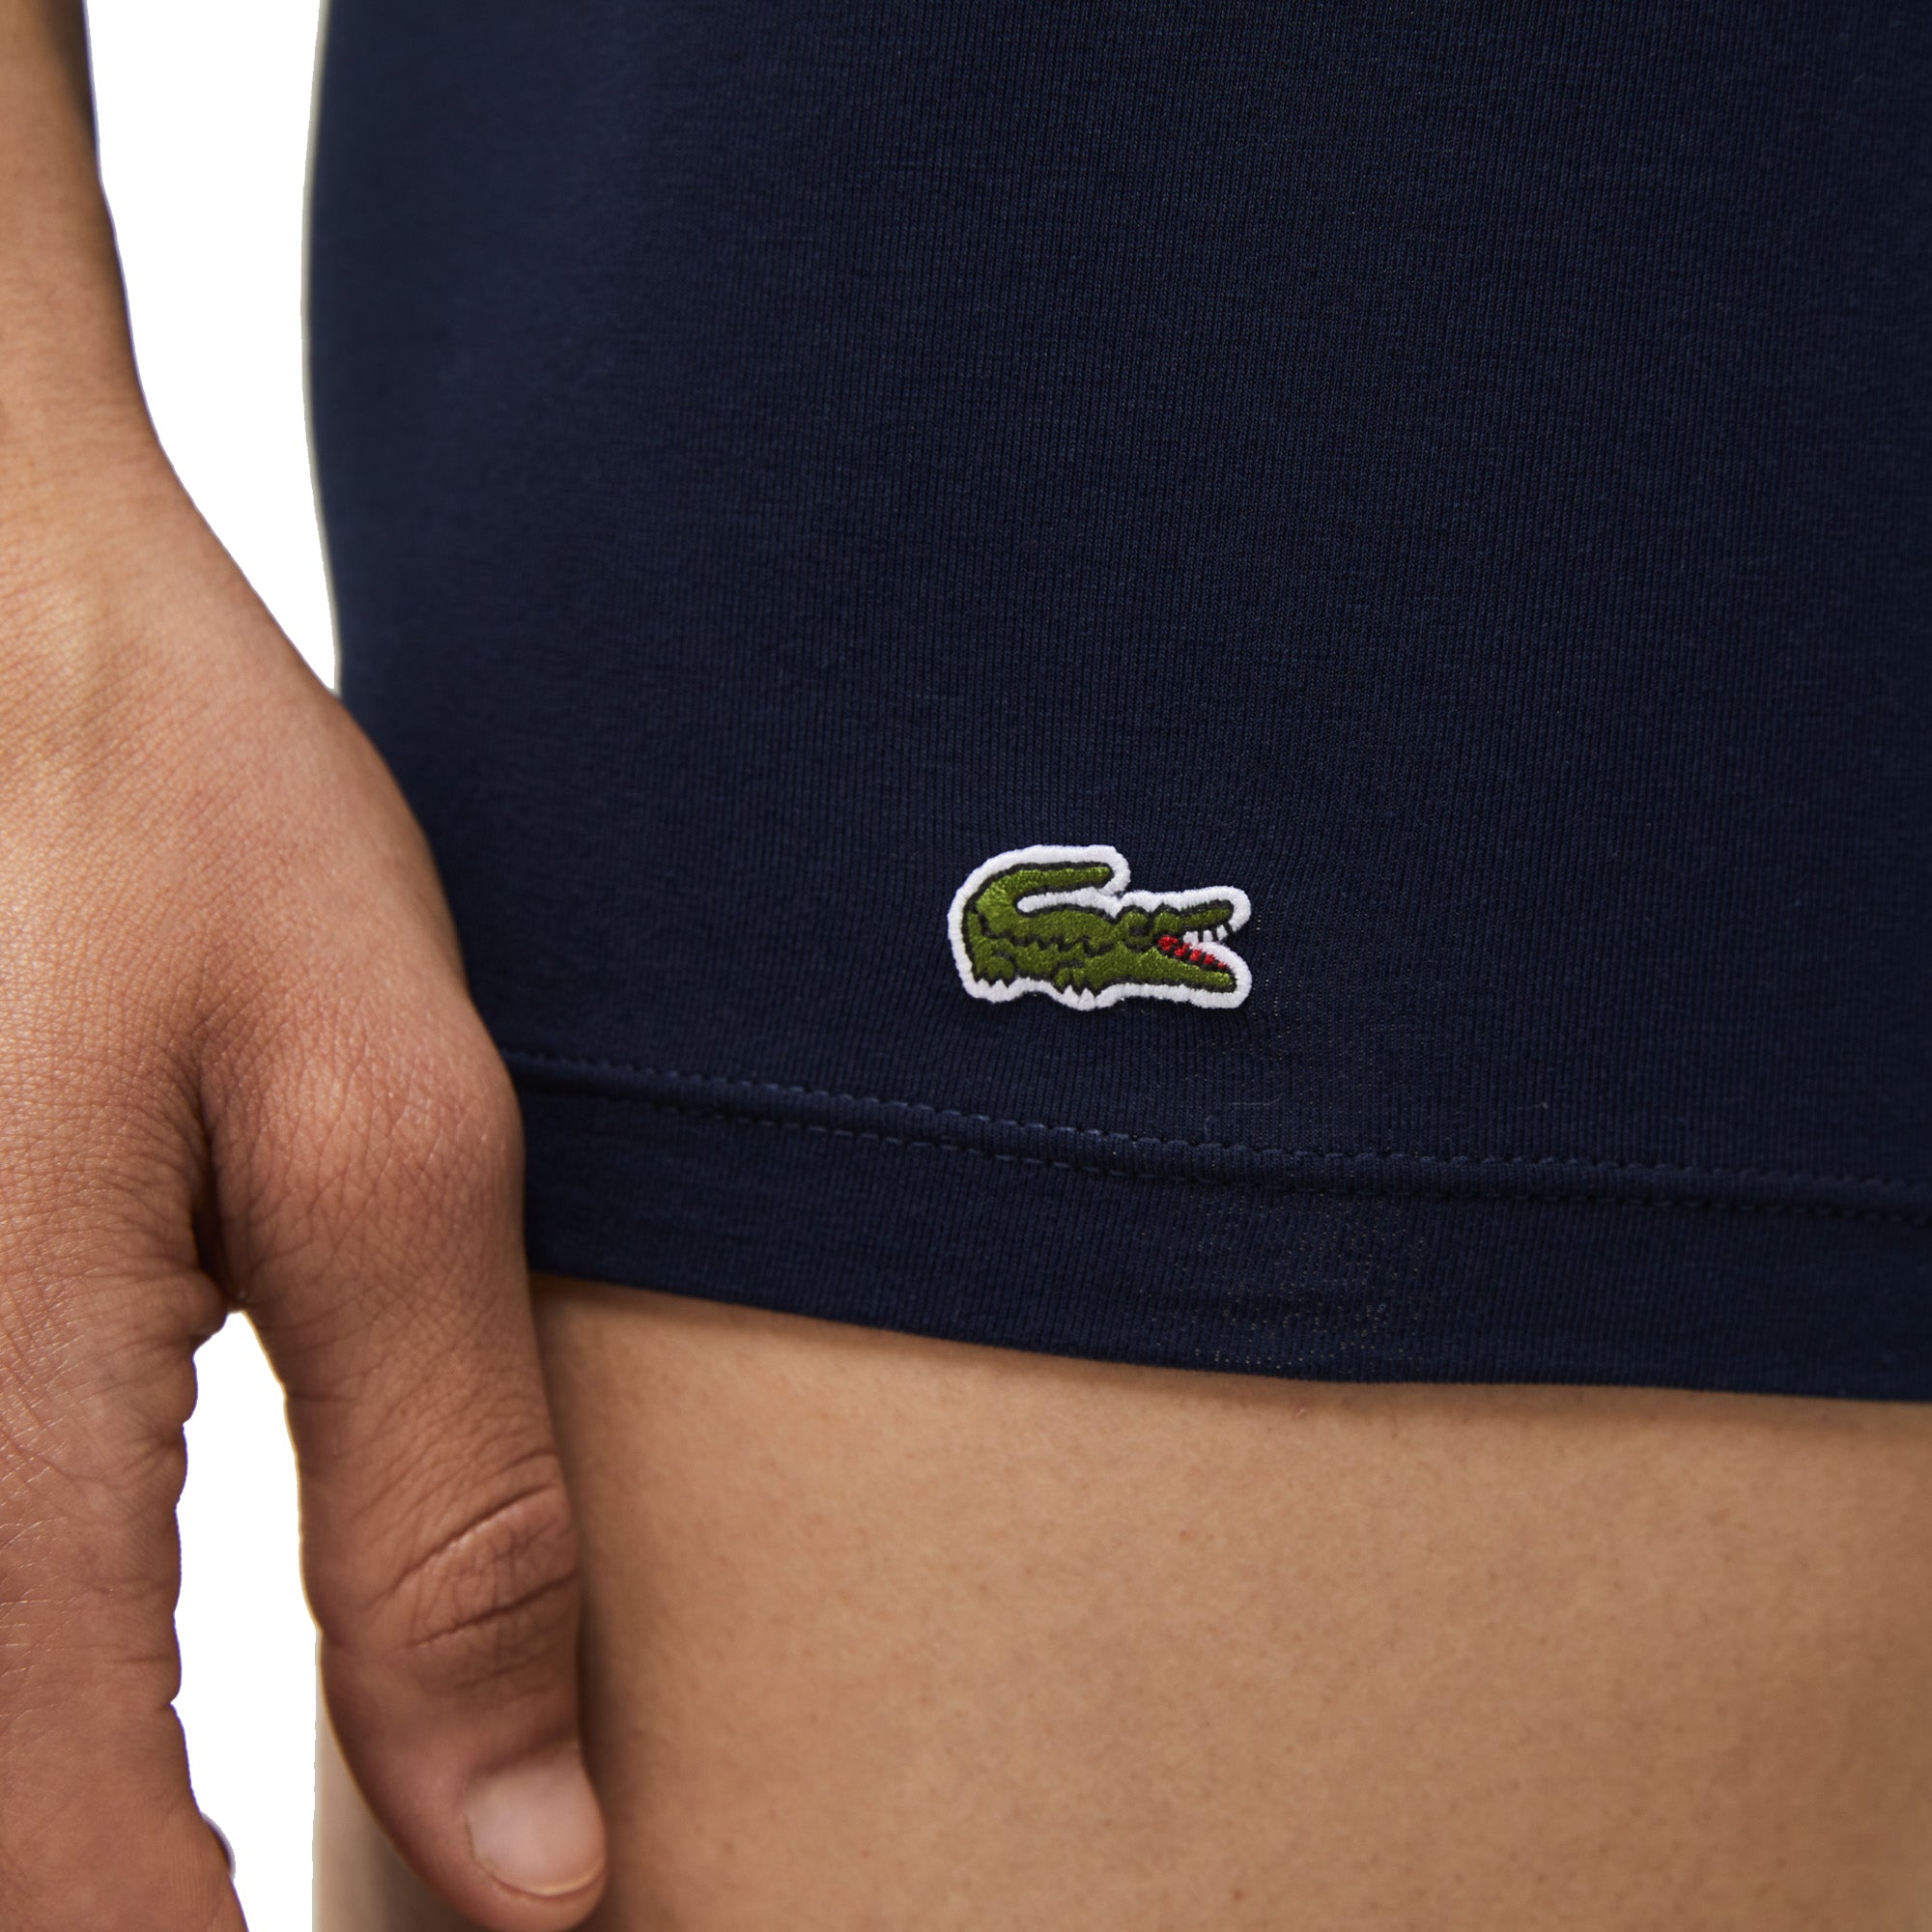 Lacoste 3 Pack Cotton Stretch Trunks - Navy with Blue/Green/Yellow Waistband